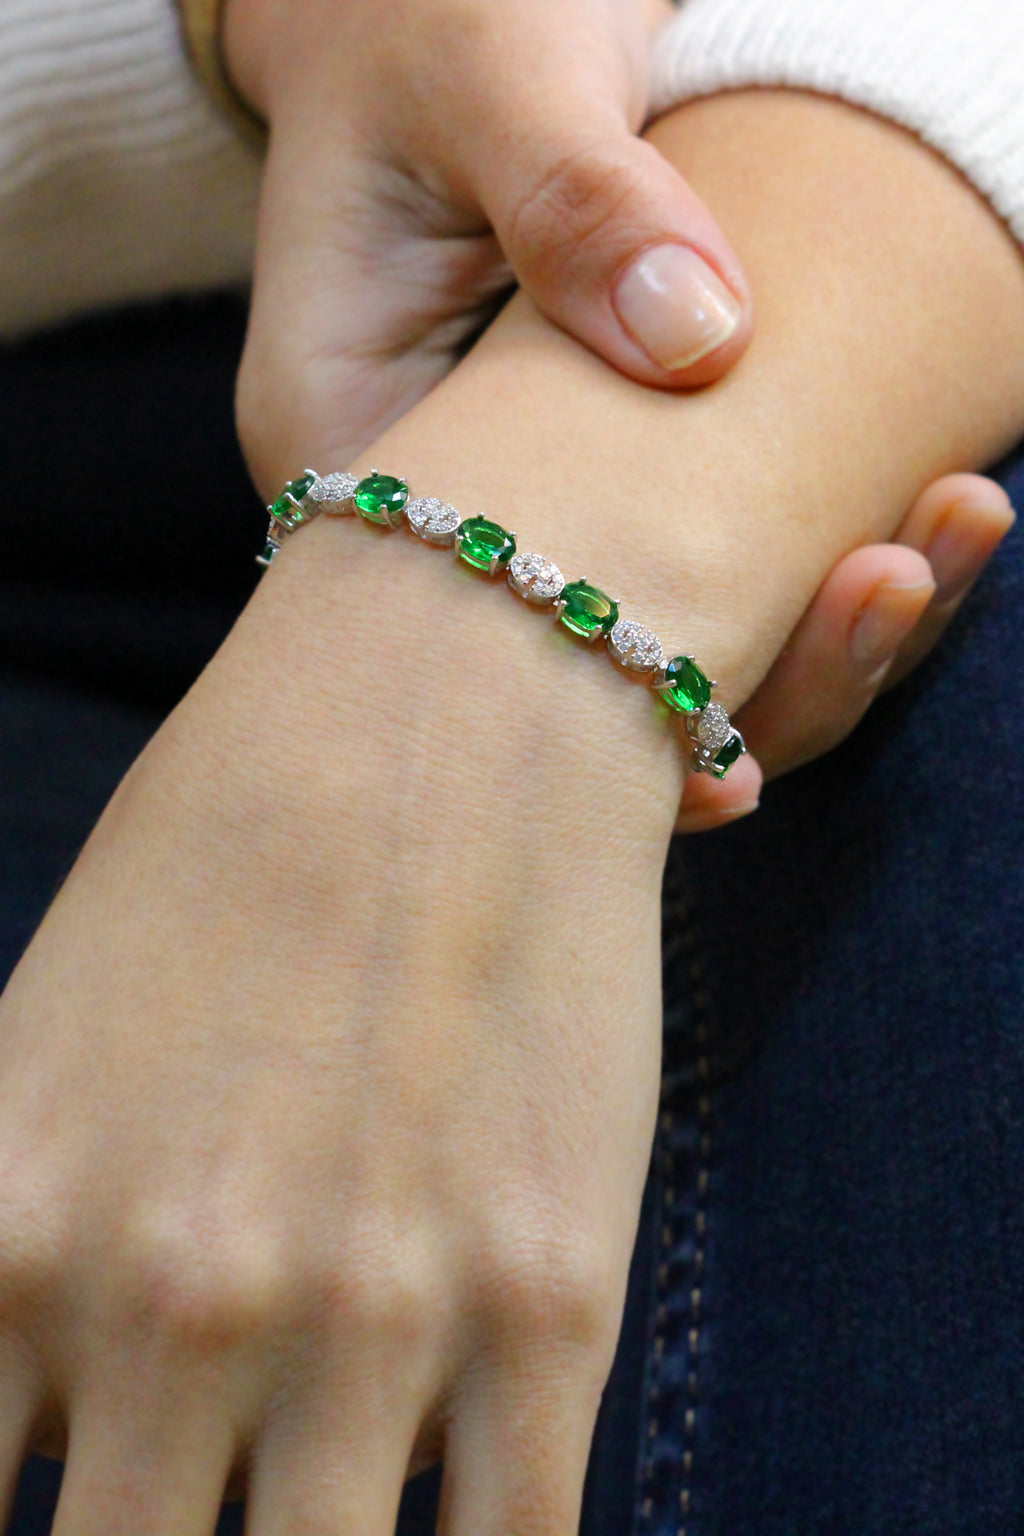 Authentic Handmade Silver Bracelet With Emerald and Zircon (NG201015168)